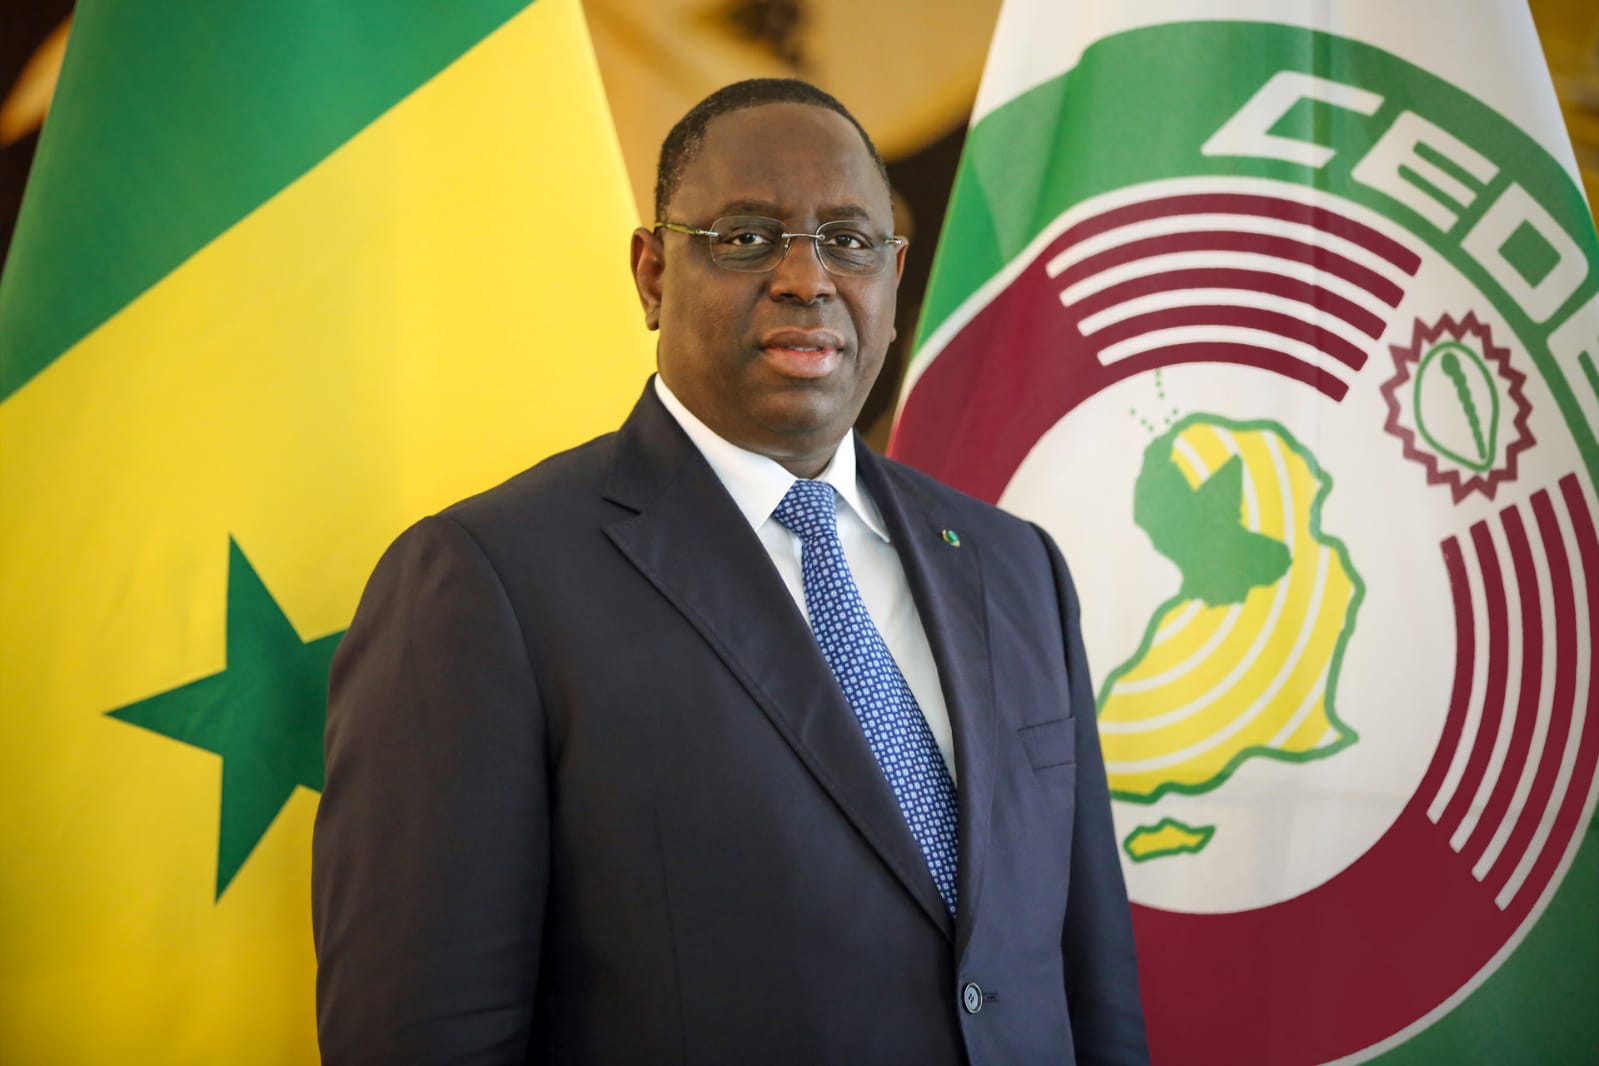 Africa Oil & Power to Honour Senegal President as “Africa Oil Man of the Year”